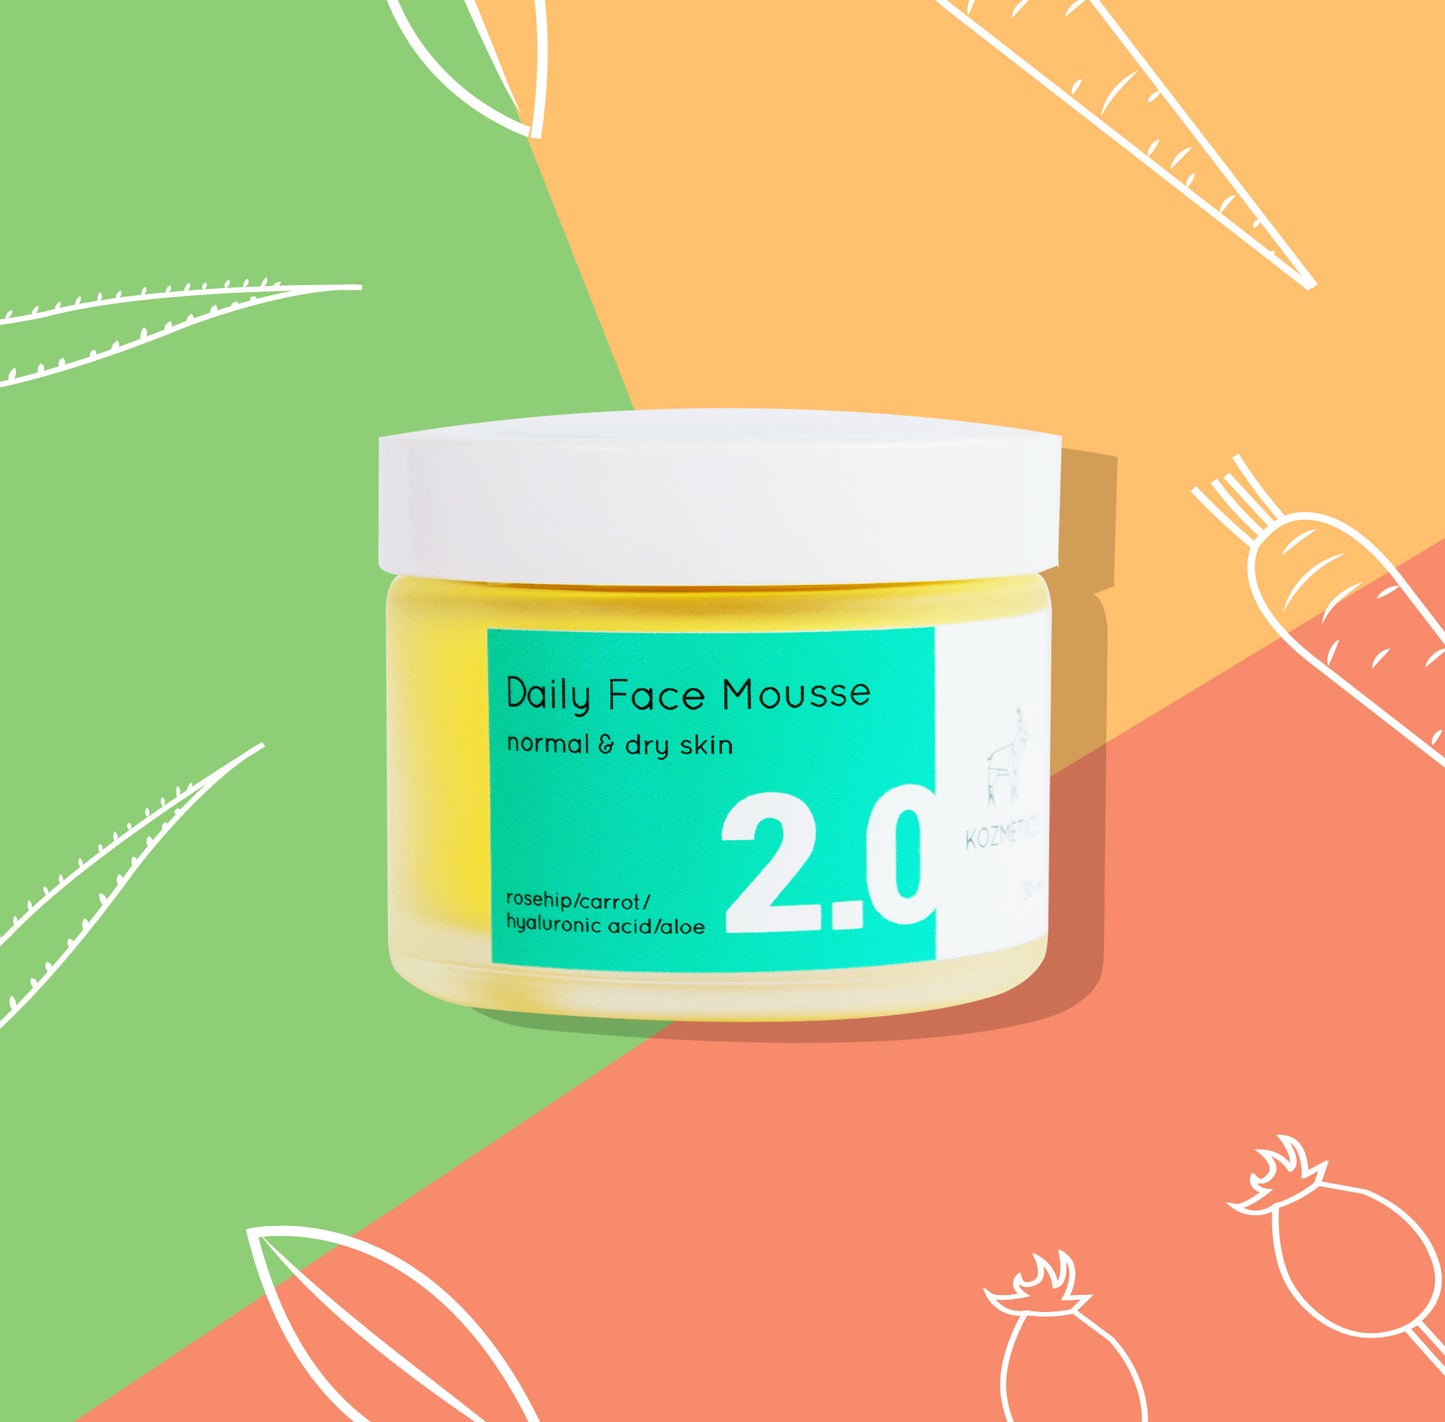 Daily Face Mousse 2.0 for Normal and Dry Skin